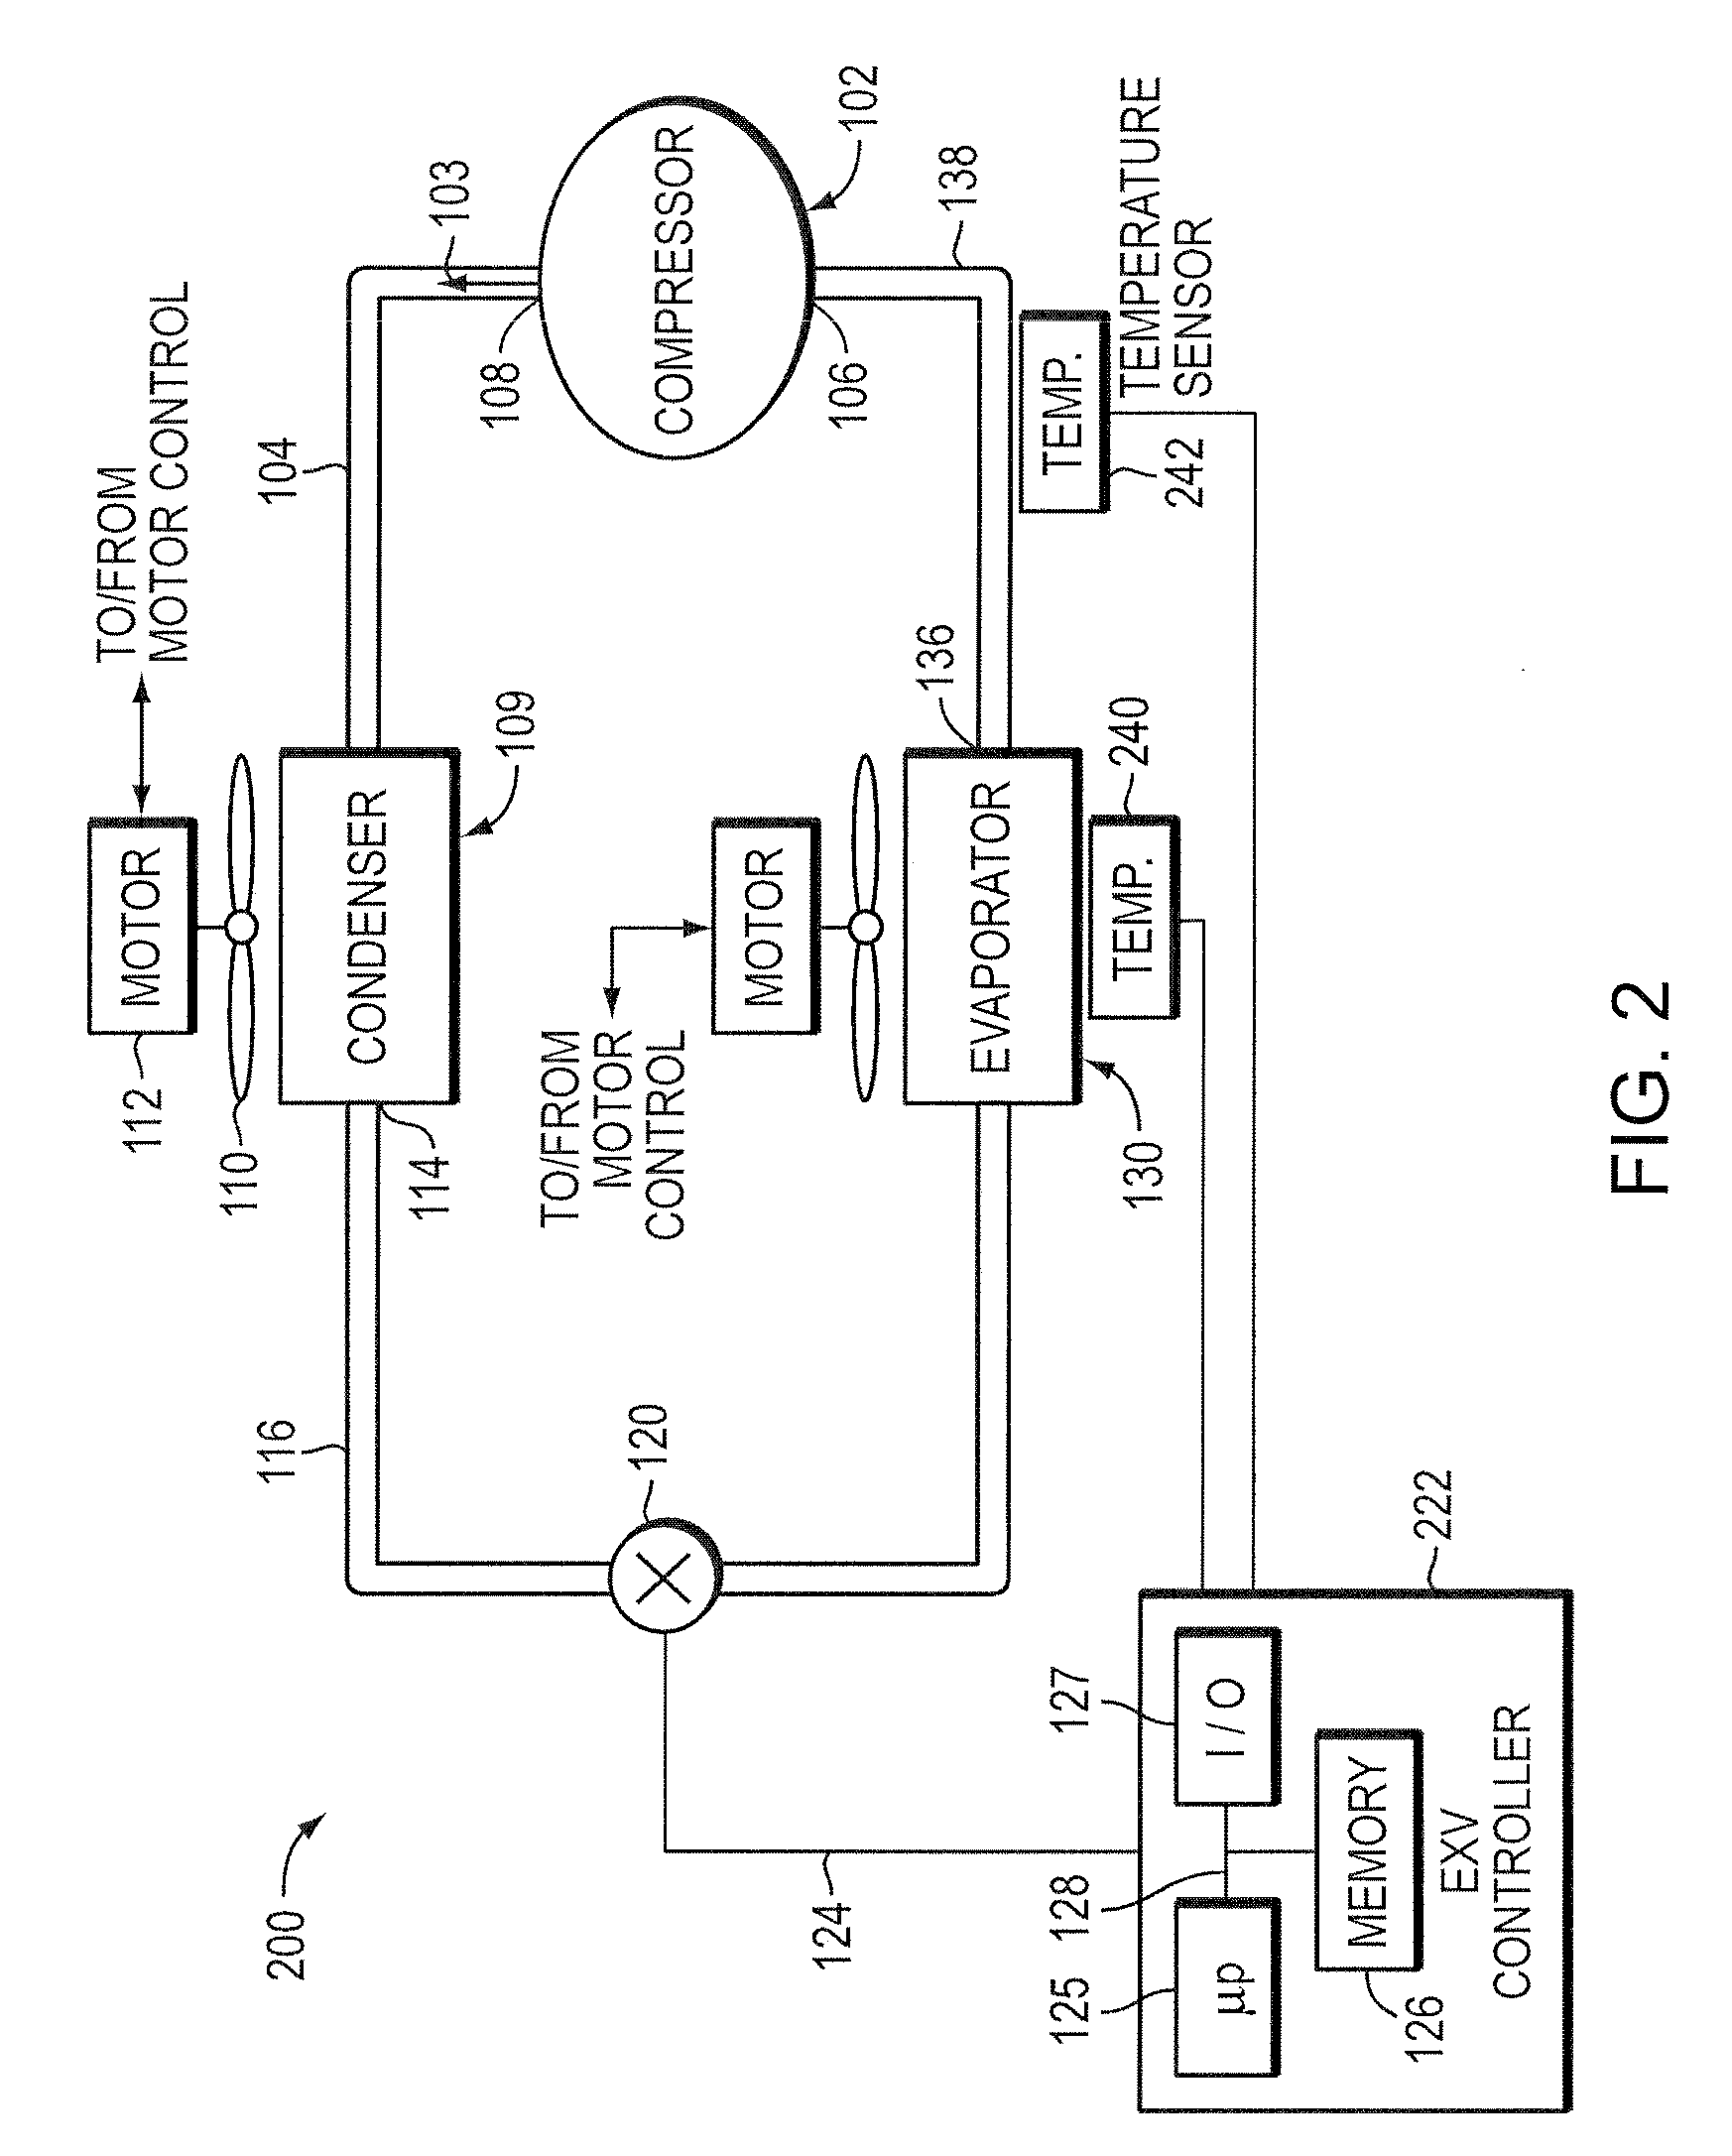 System and method for controlling an air conditioner or heat pump